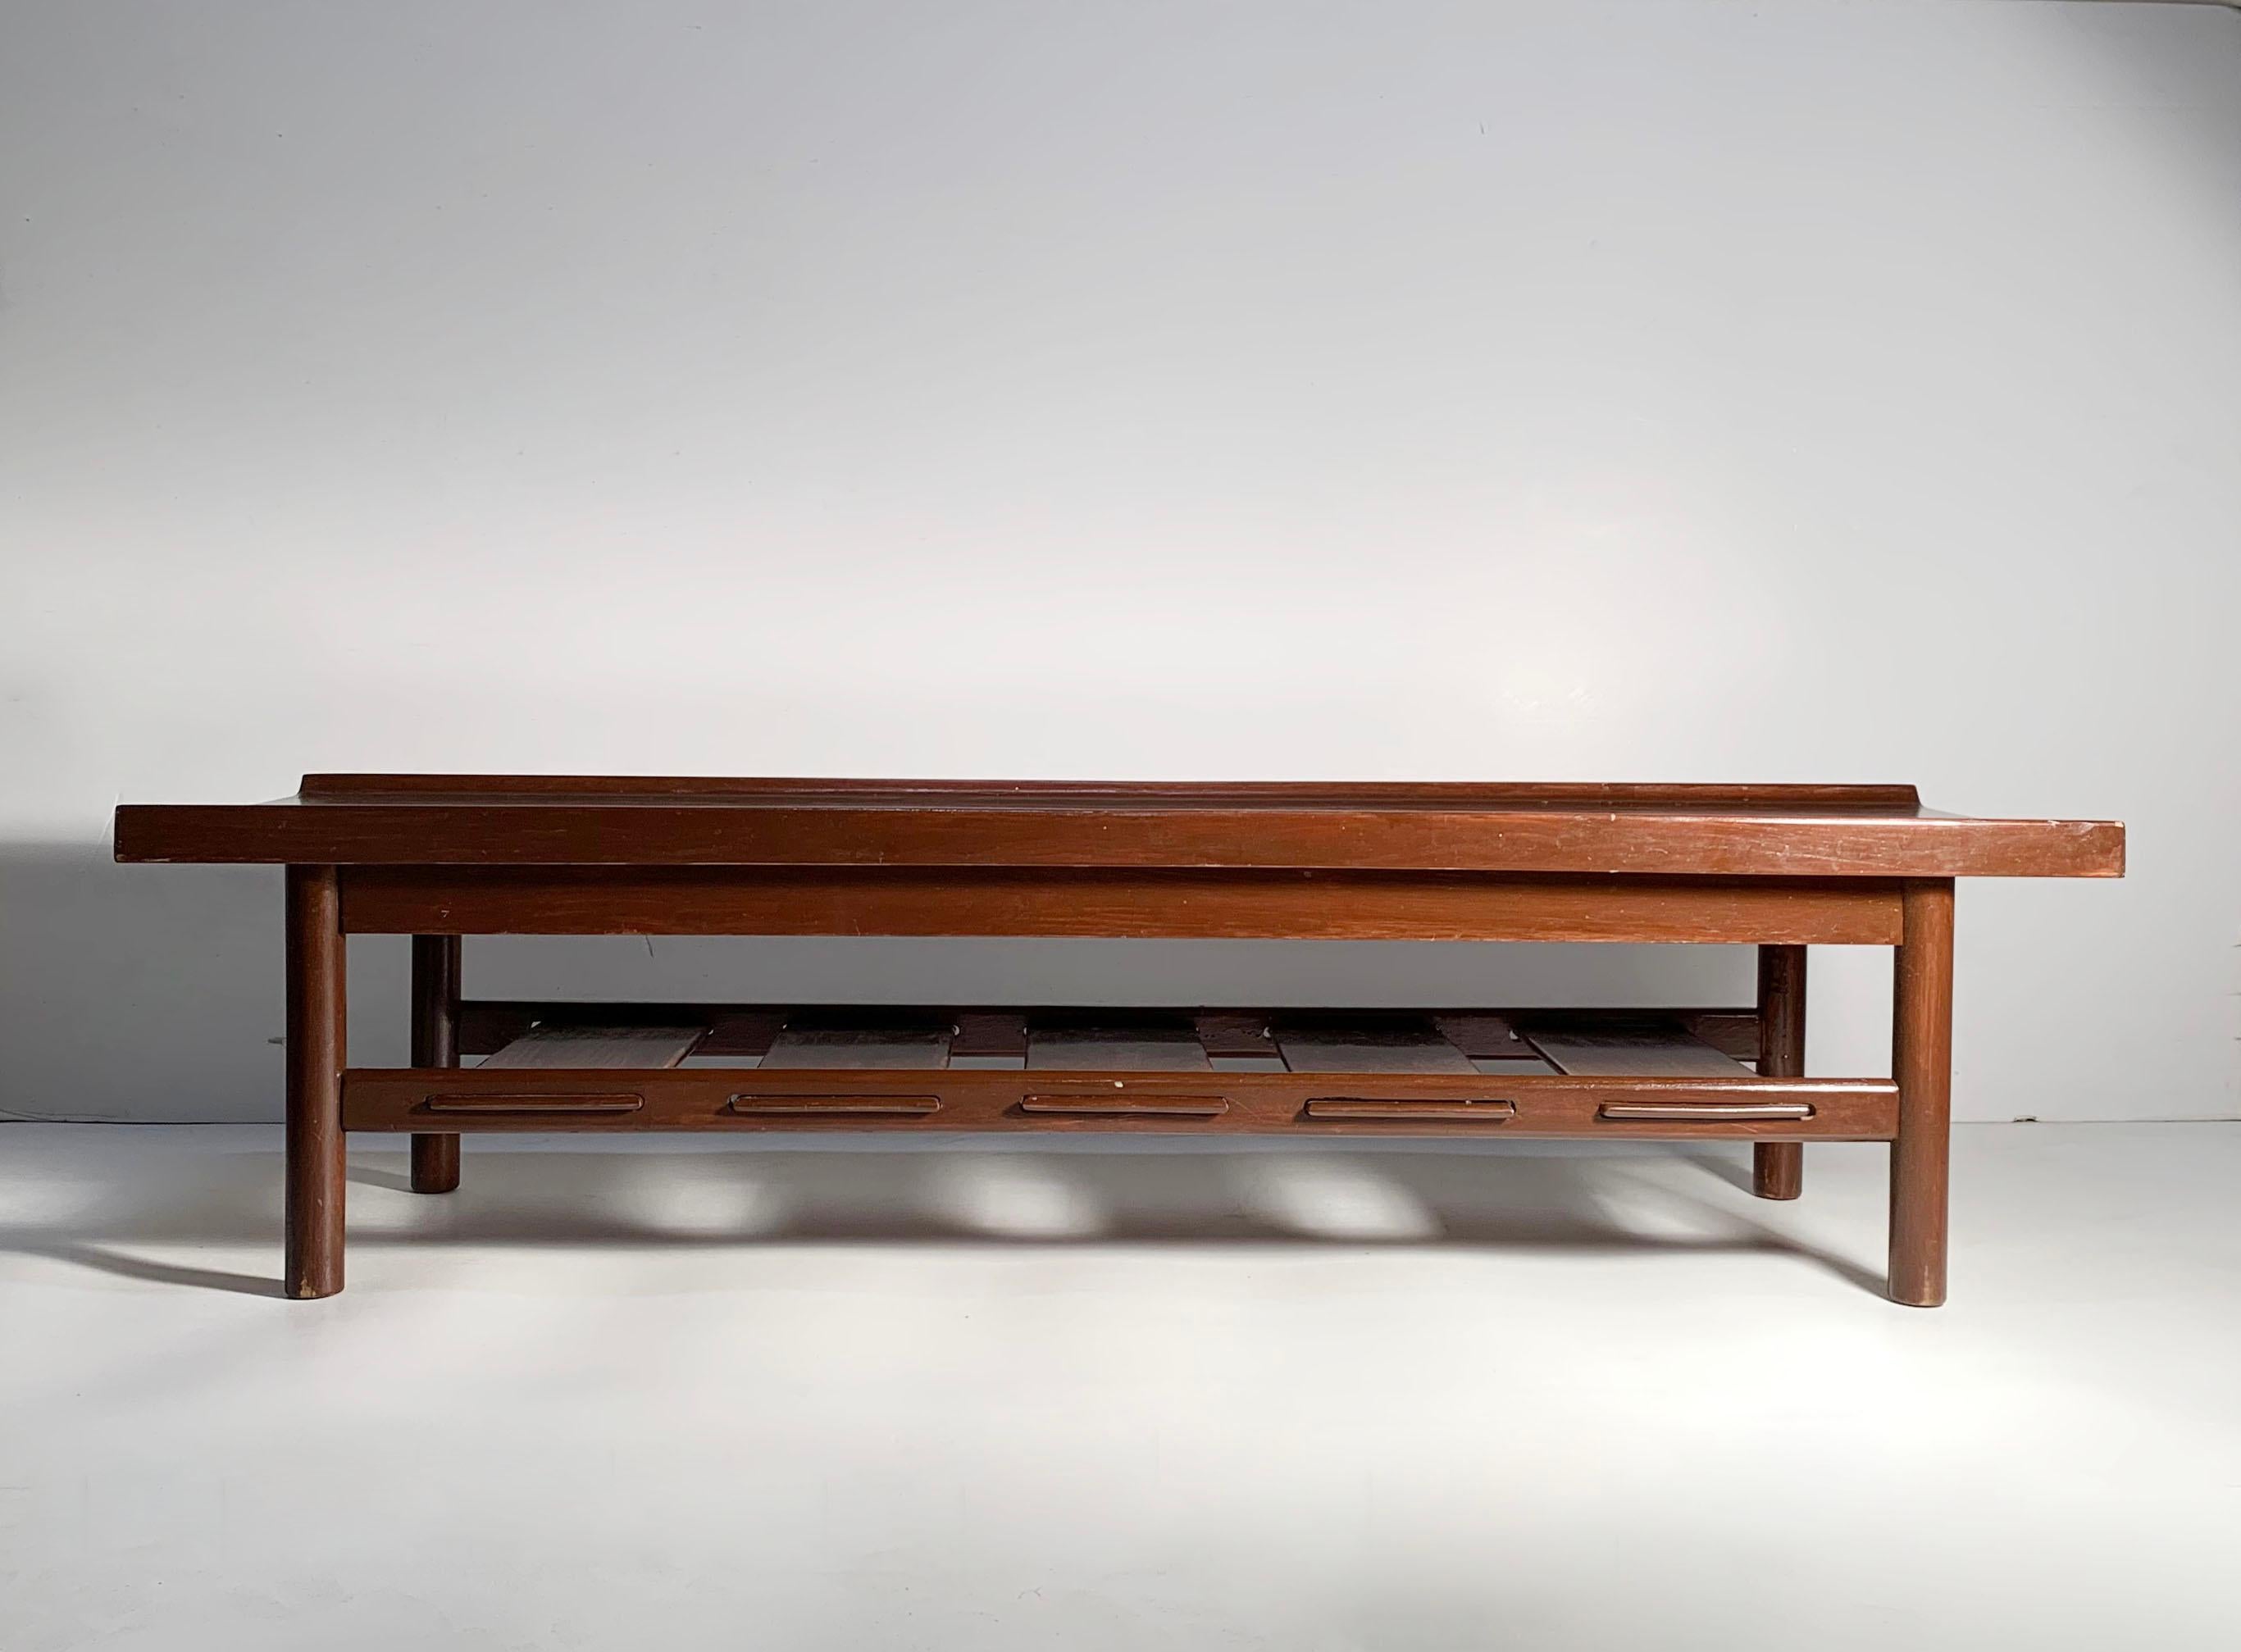 Lawrence Peabody Long Walnut Bench / Coffee Table For Richardson-Nemschoff. This bench should be purchased with the intent to completely refinish and possibly lacquer a color. Looks like someone painted this bench brown at one time. A fair amount of